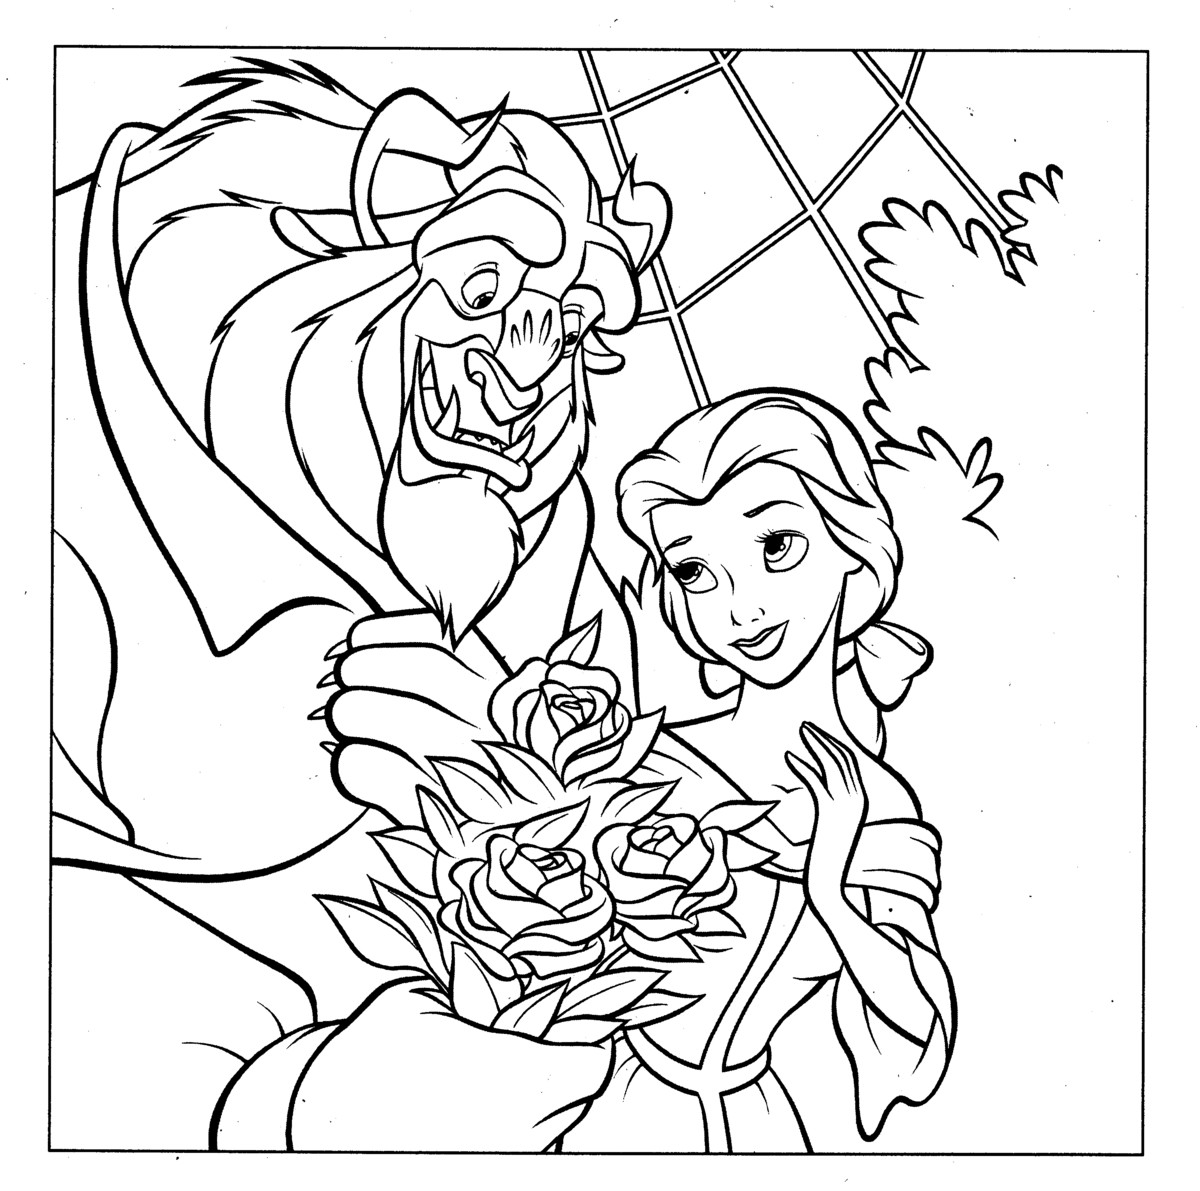  Princess Belle and the beast Coloring pages